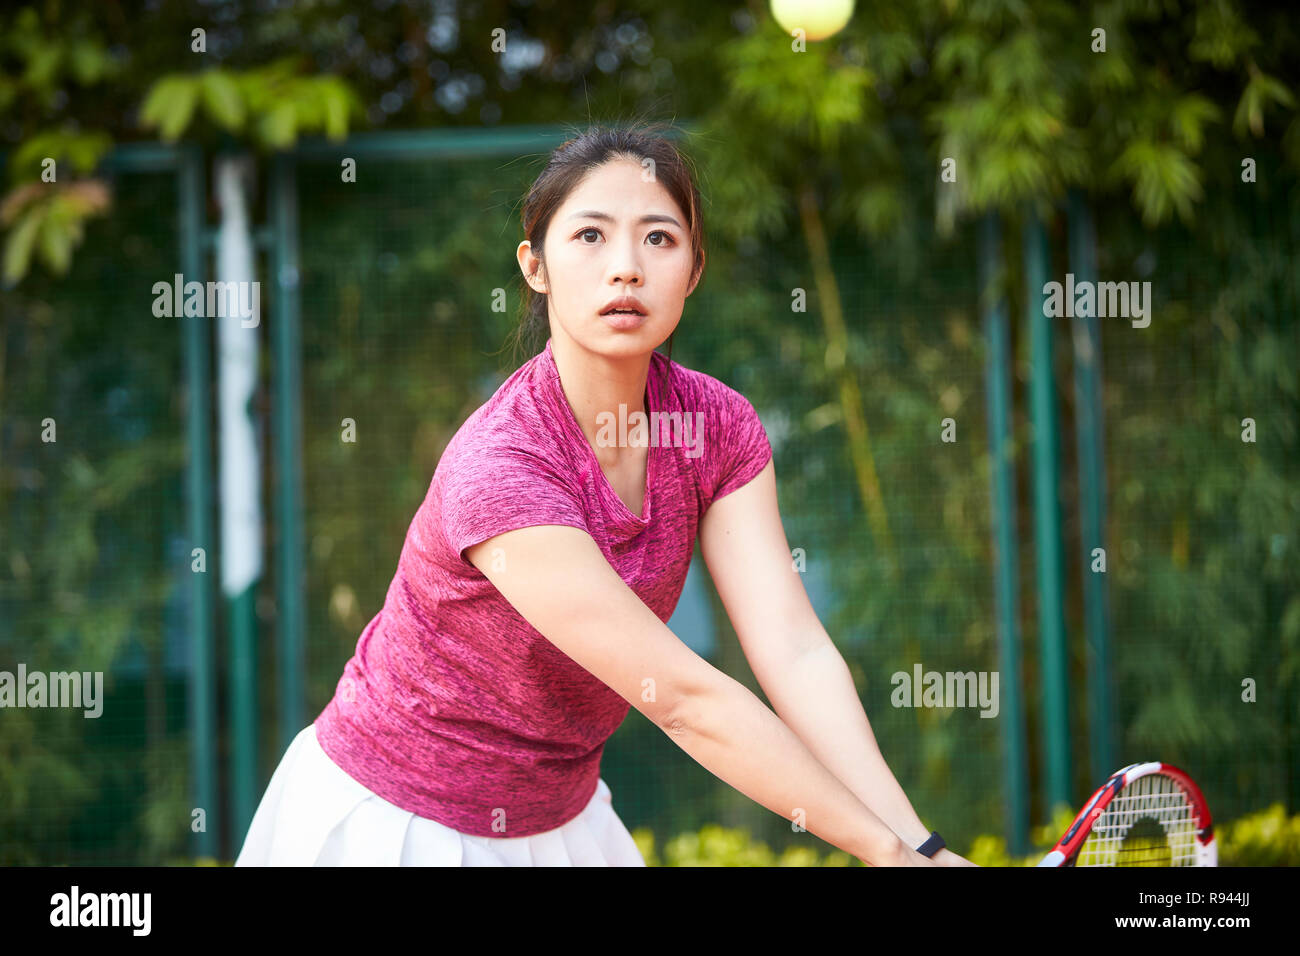 Young Asian woman tennis player hitting ball avec revers Banque D'Images